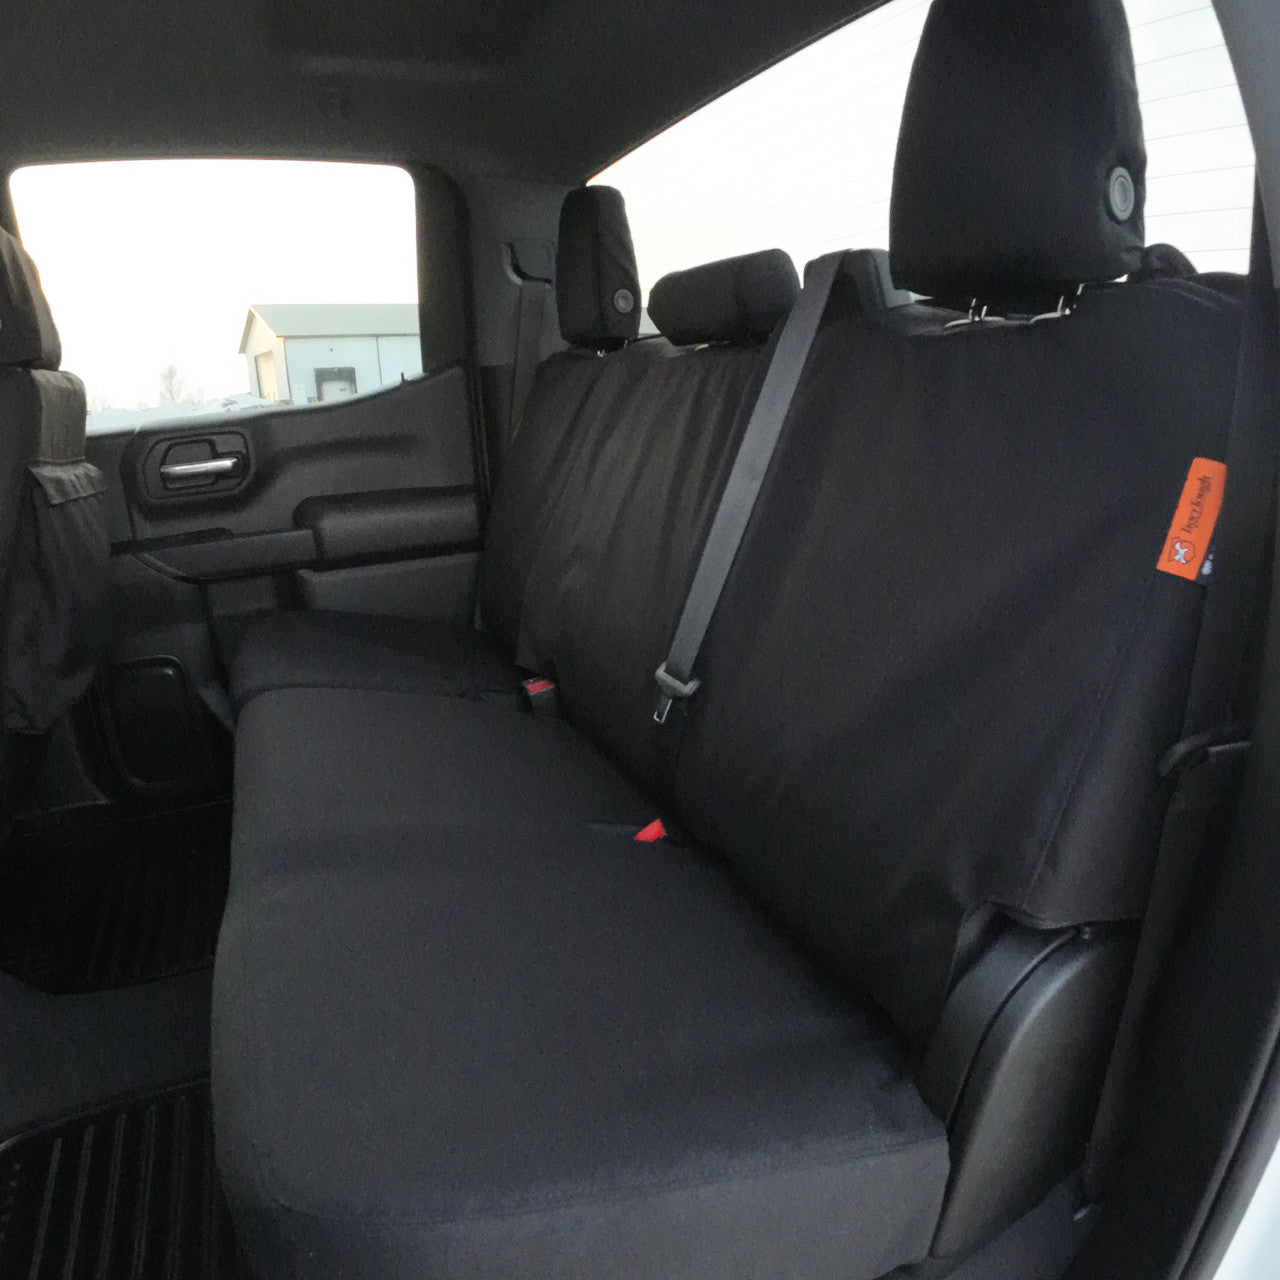 Rear Seat Covers for Chevy & GMC Trucks (65515) - Sportweave